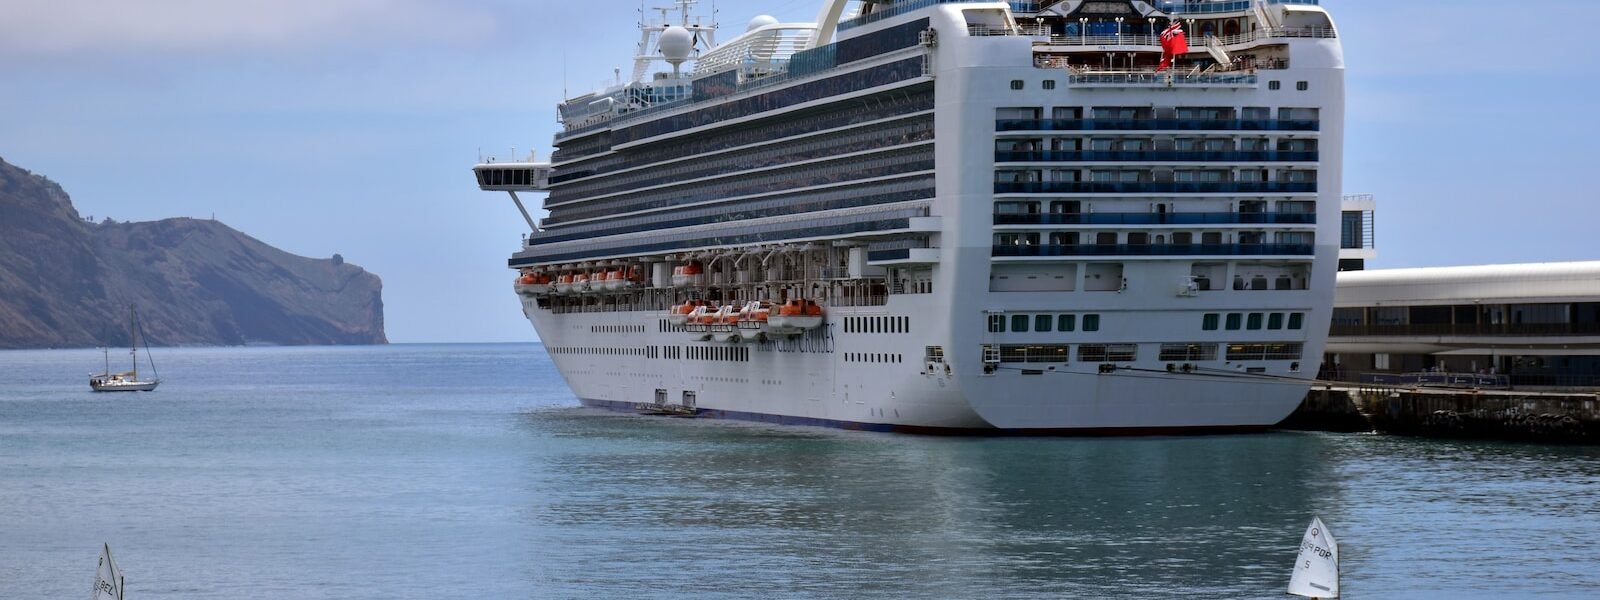 a large cruise ship in the water next to a dock